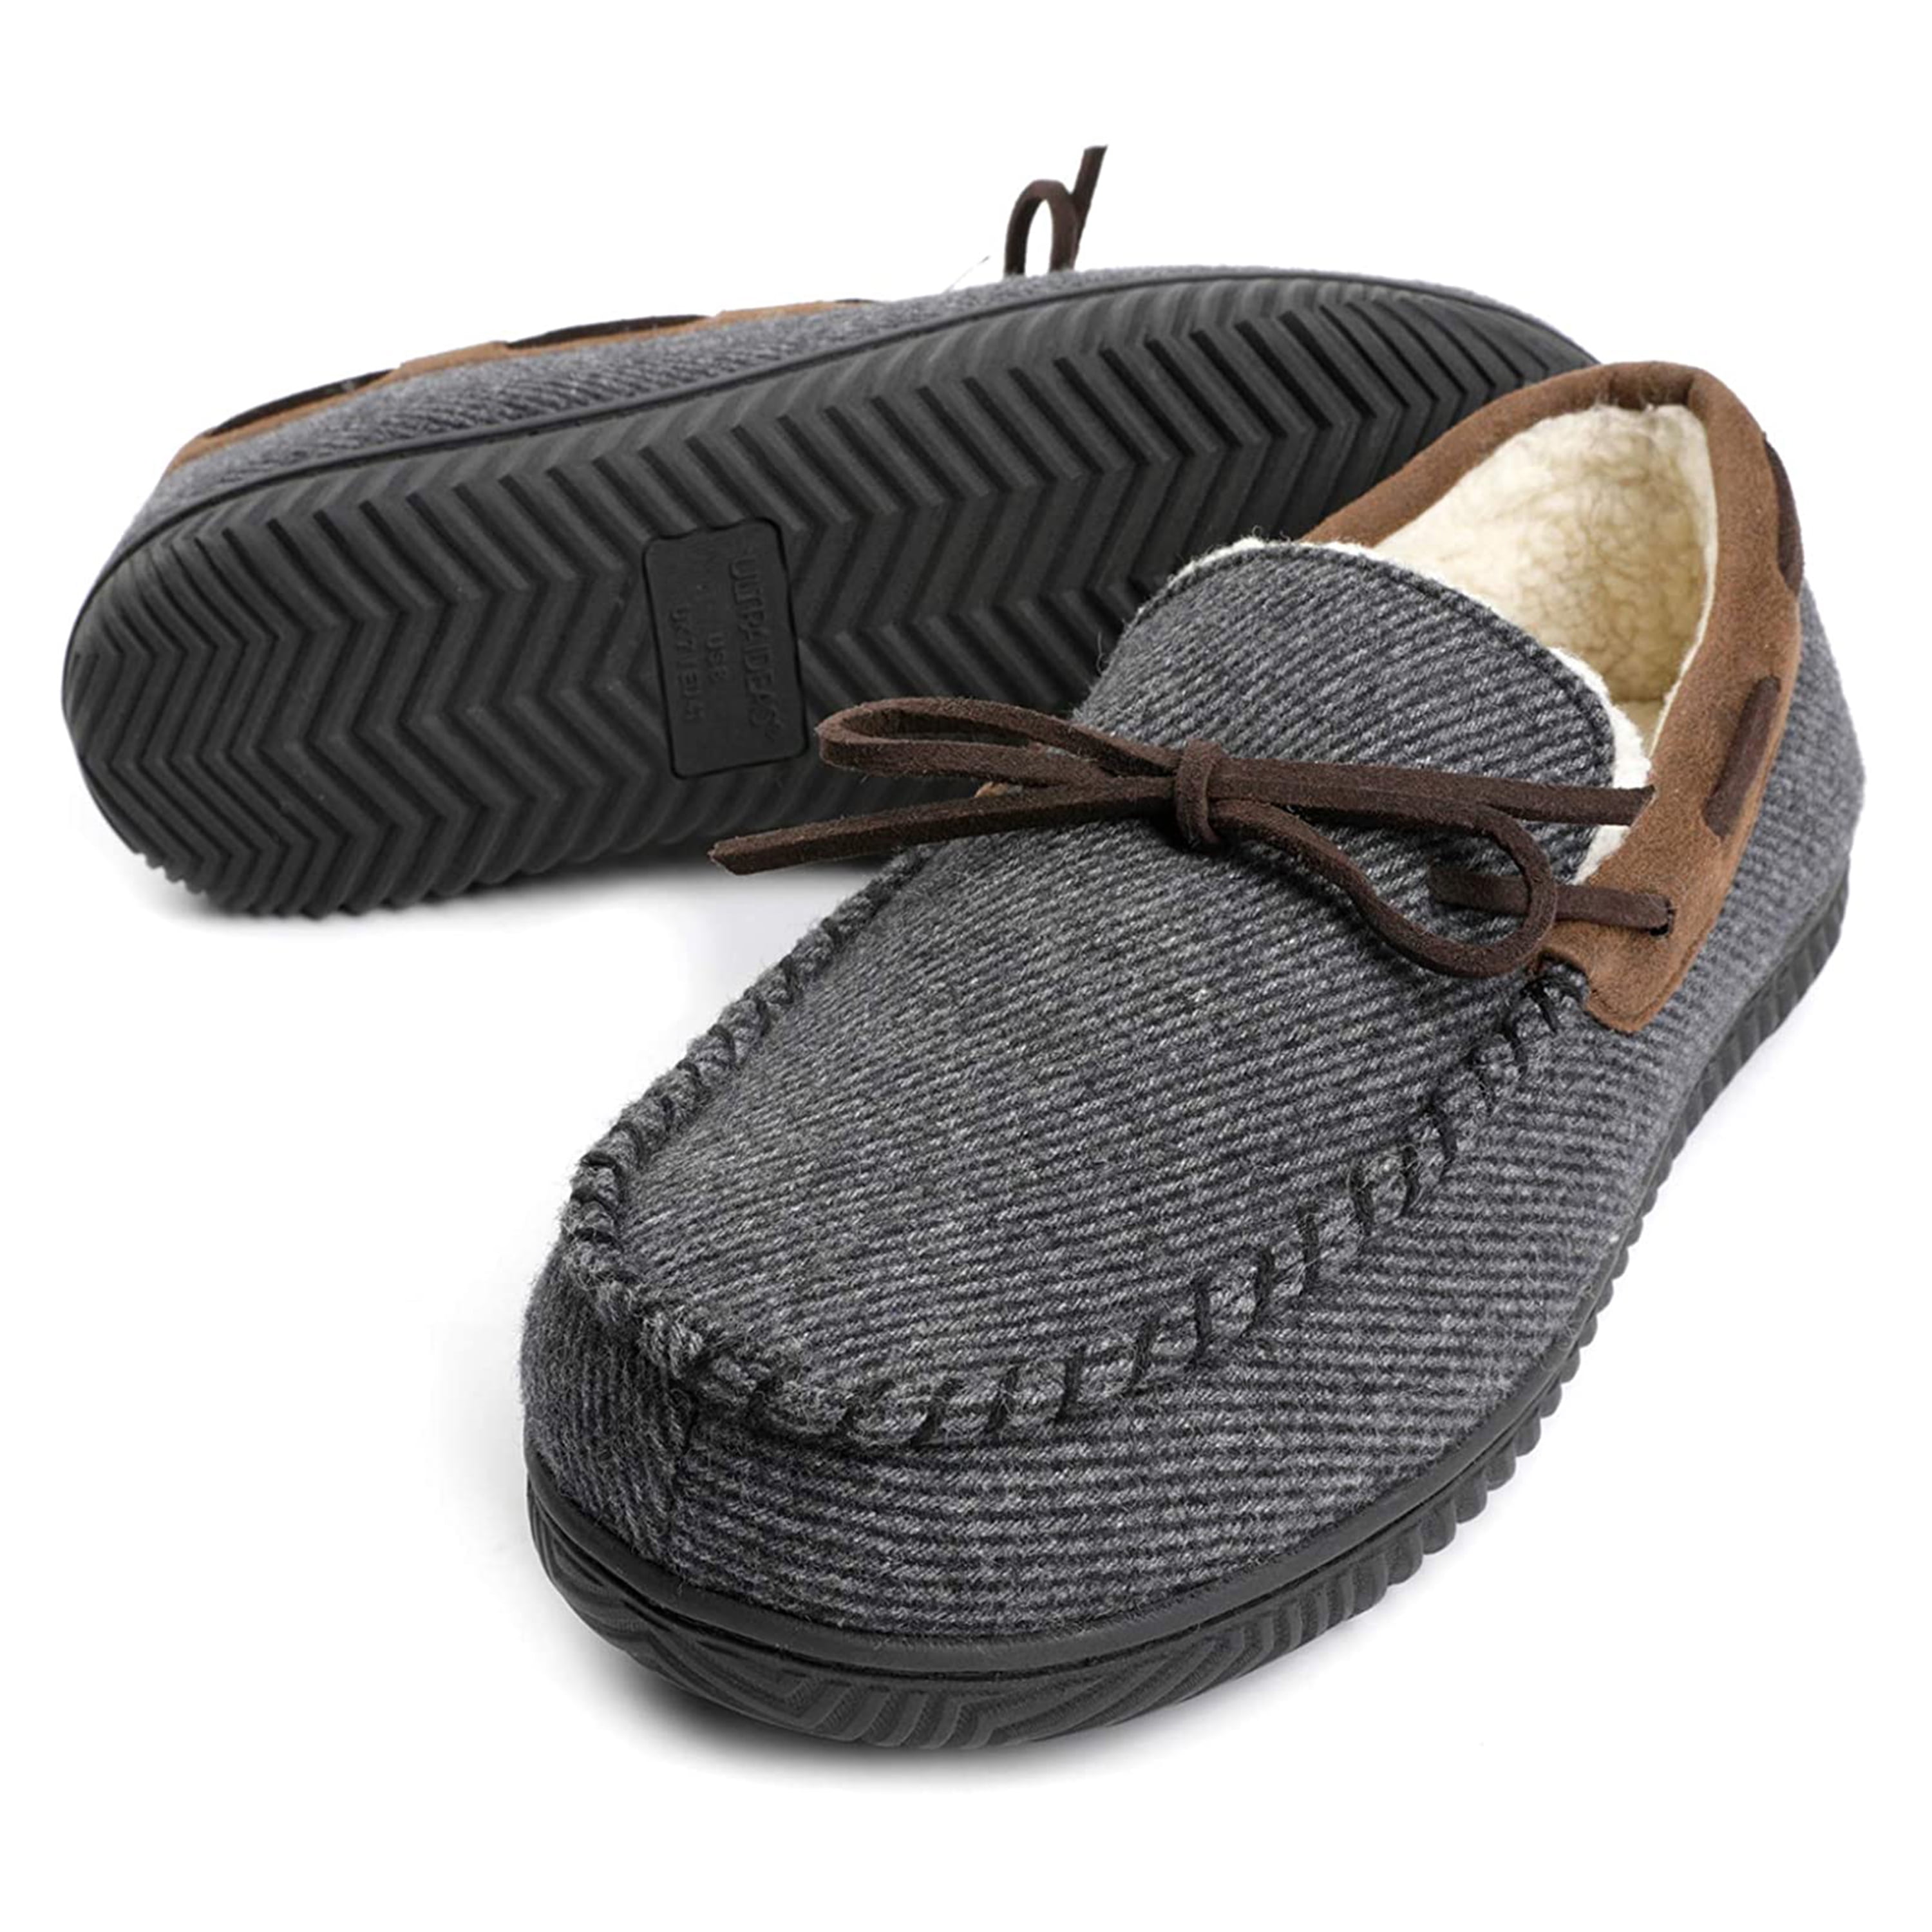 NEW MENS ULTRA LIGHT MOCCASIN HARD SOLE FUR LINED SOFT COMFORT SLIPPERS SIZE